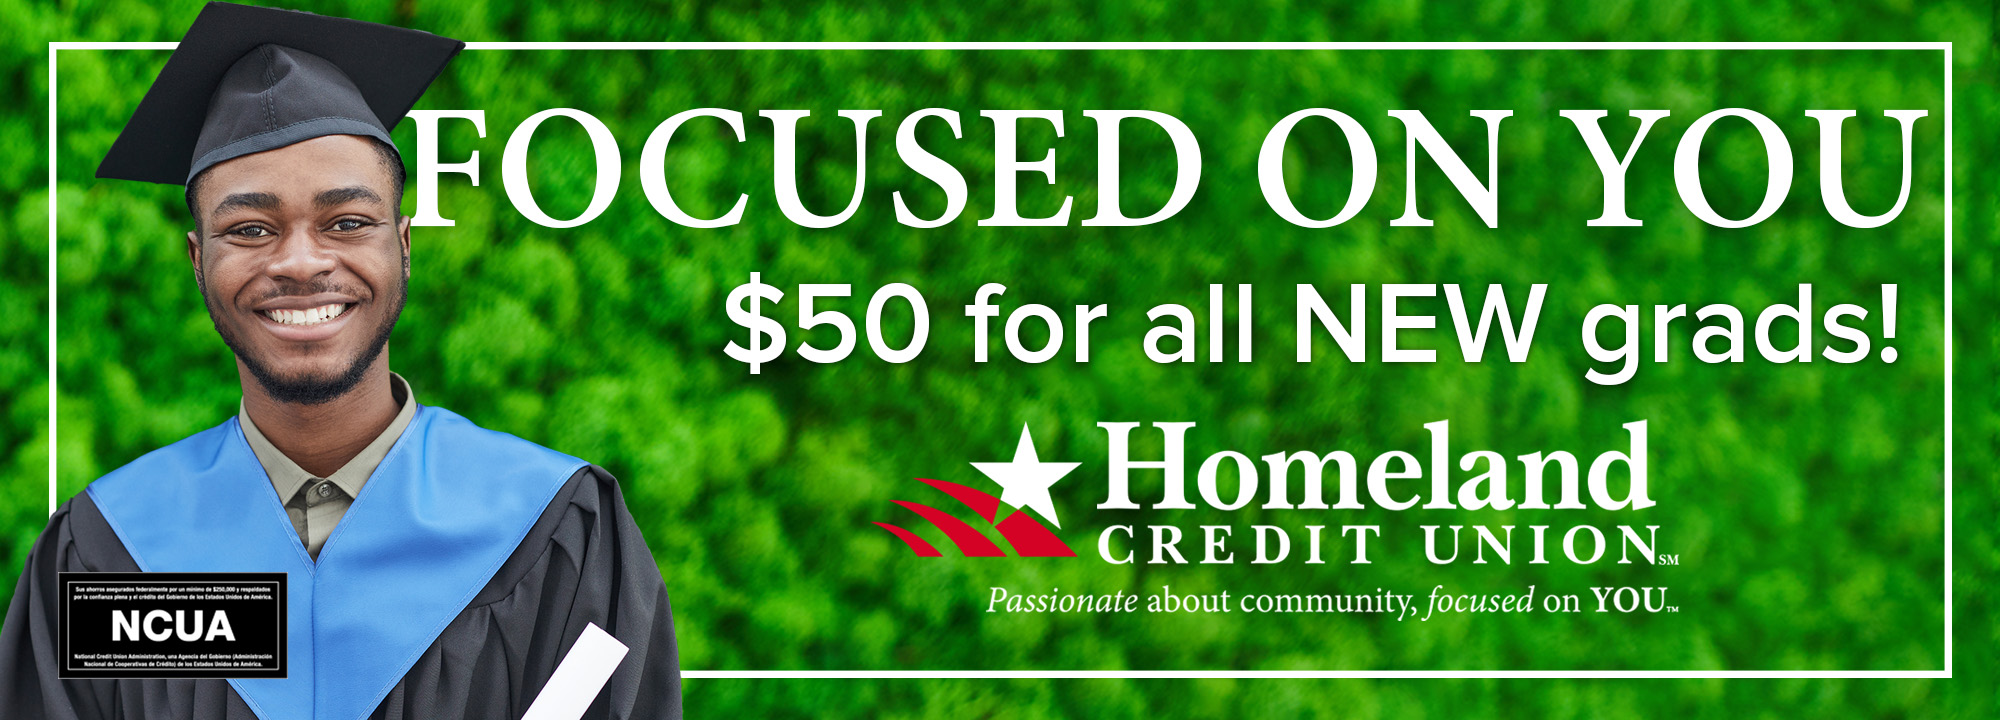 Focused on you! $50 for all new grads. Homeland Credit Union. $50 for all new grads! Click to learn more.